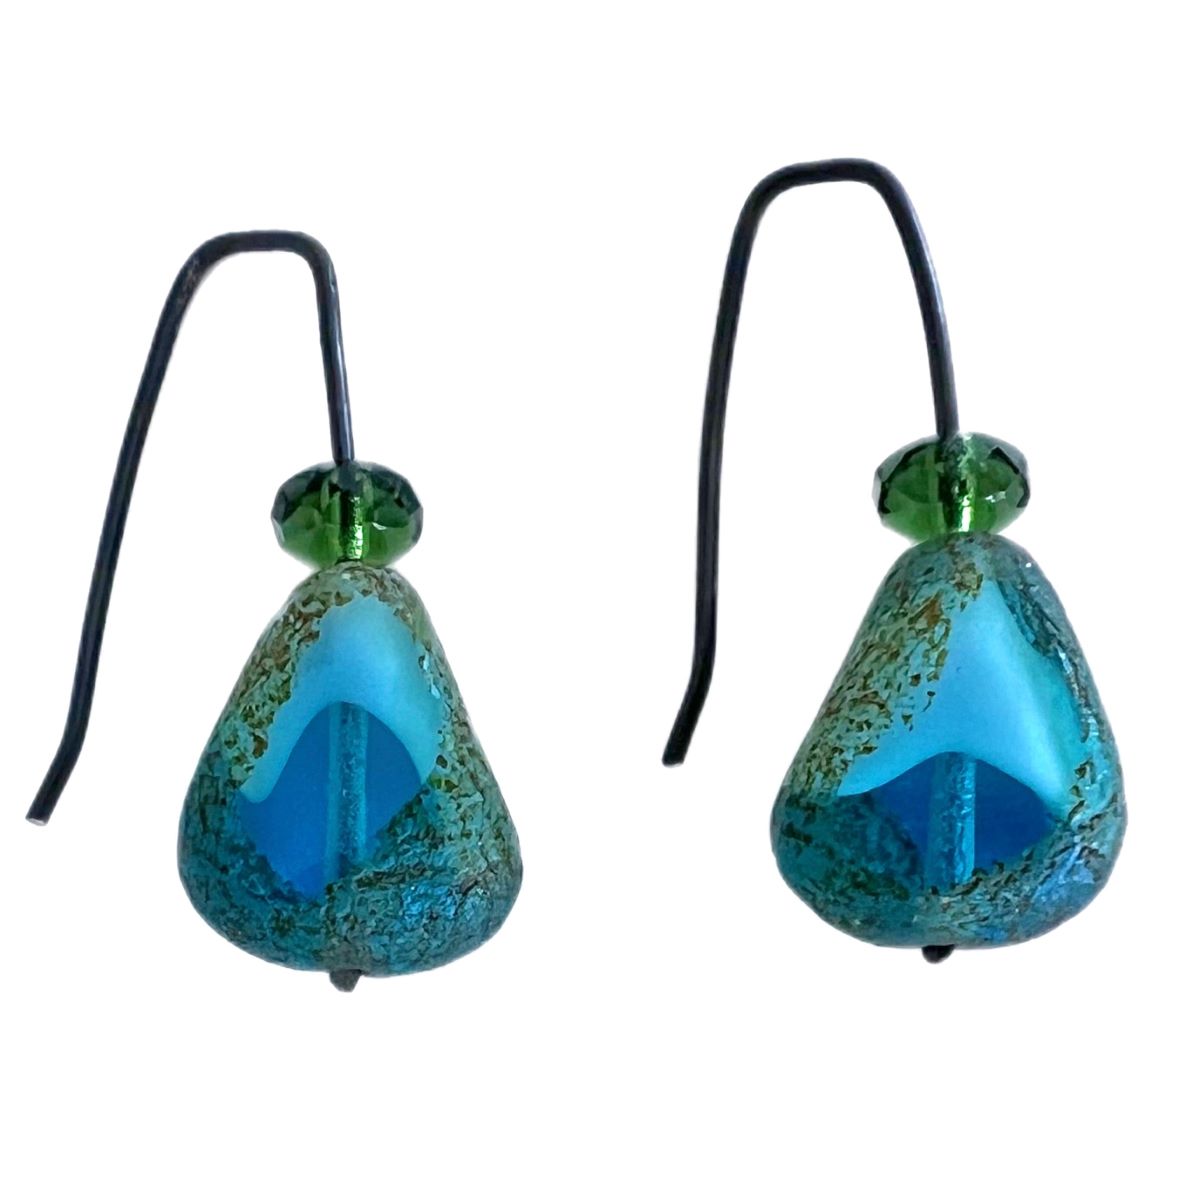 LILY TSAY - PICASSO GLASS WITH STONE EARRINGS - MIXED MEDIA